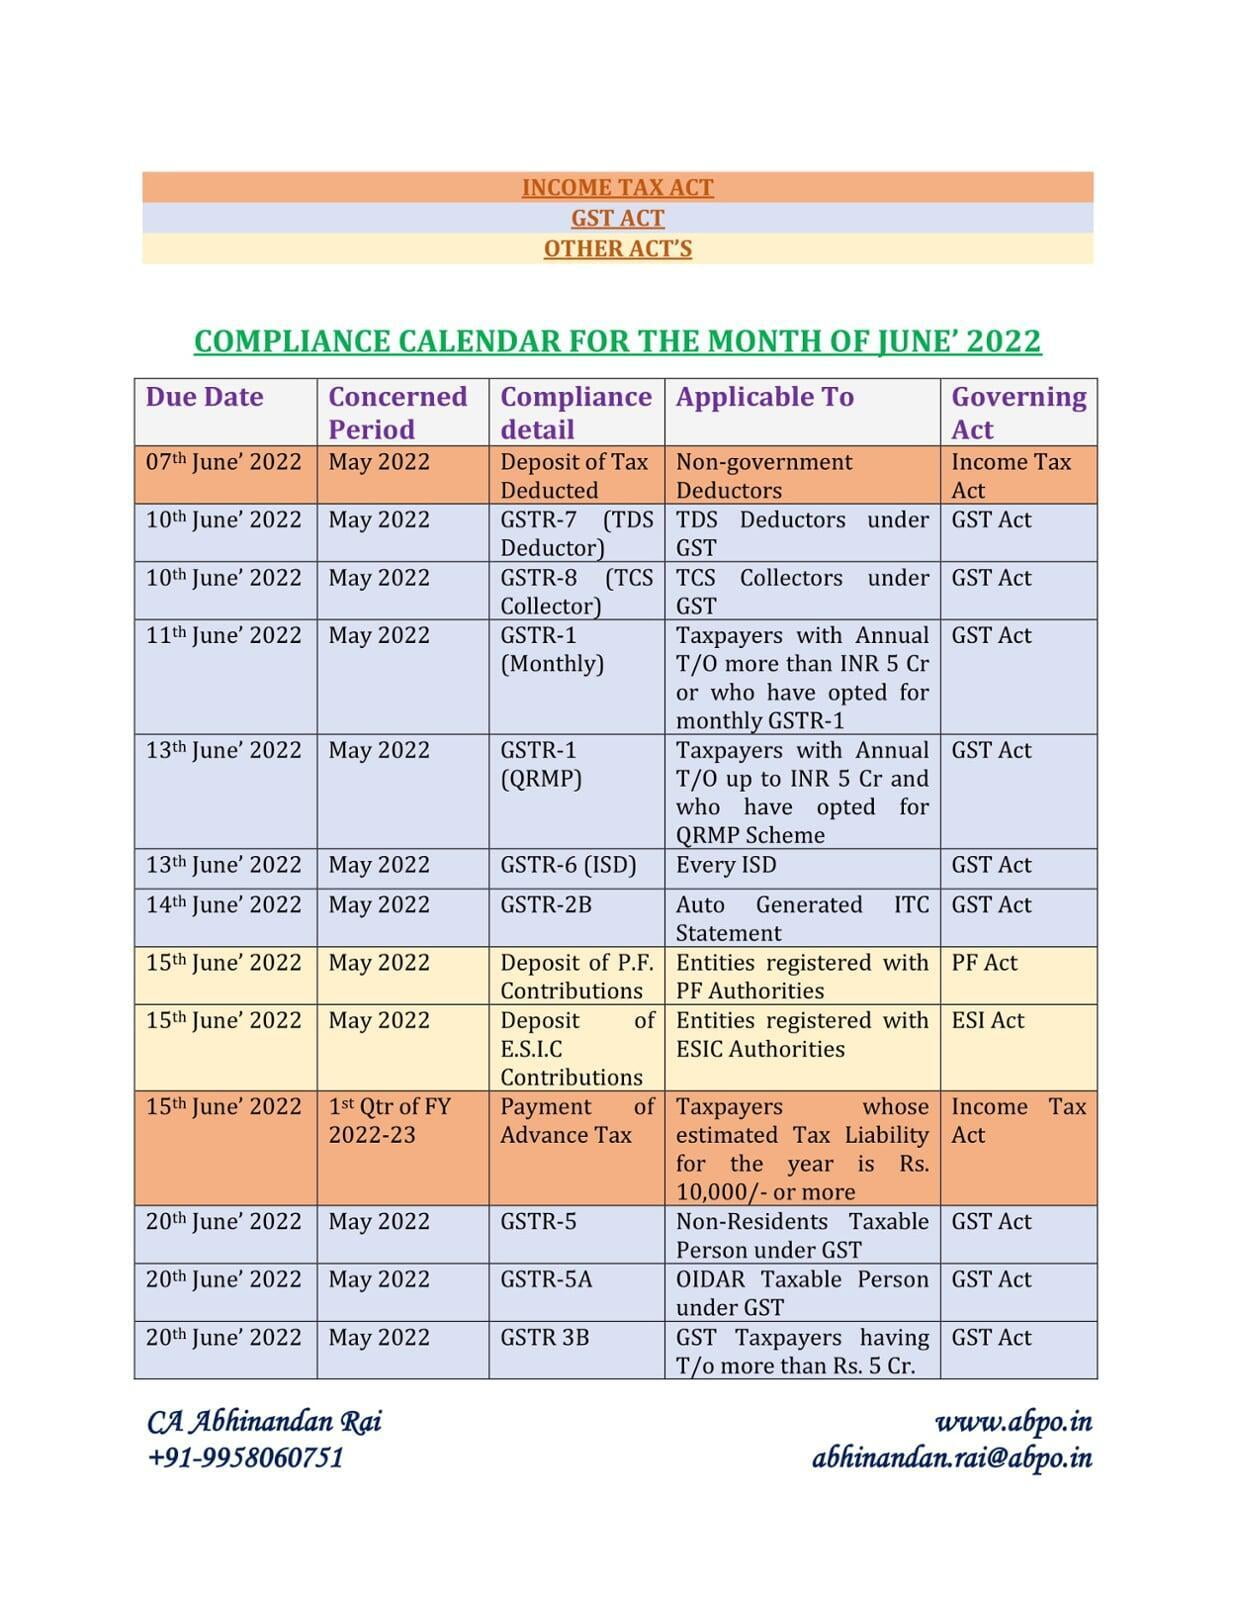 Due Date / Compliance Calendar for the Month of June' 2022 under GST, Income Tax Act and others..... 